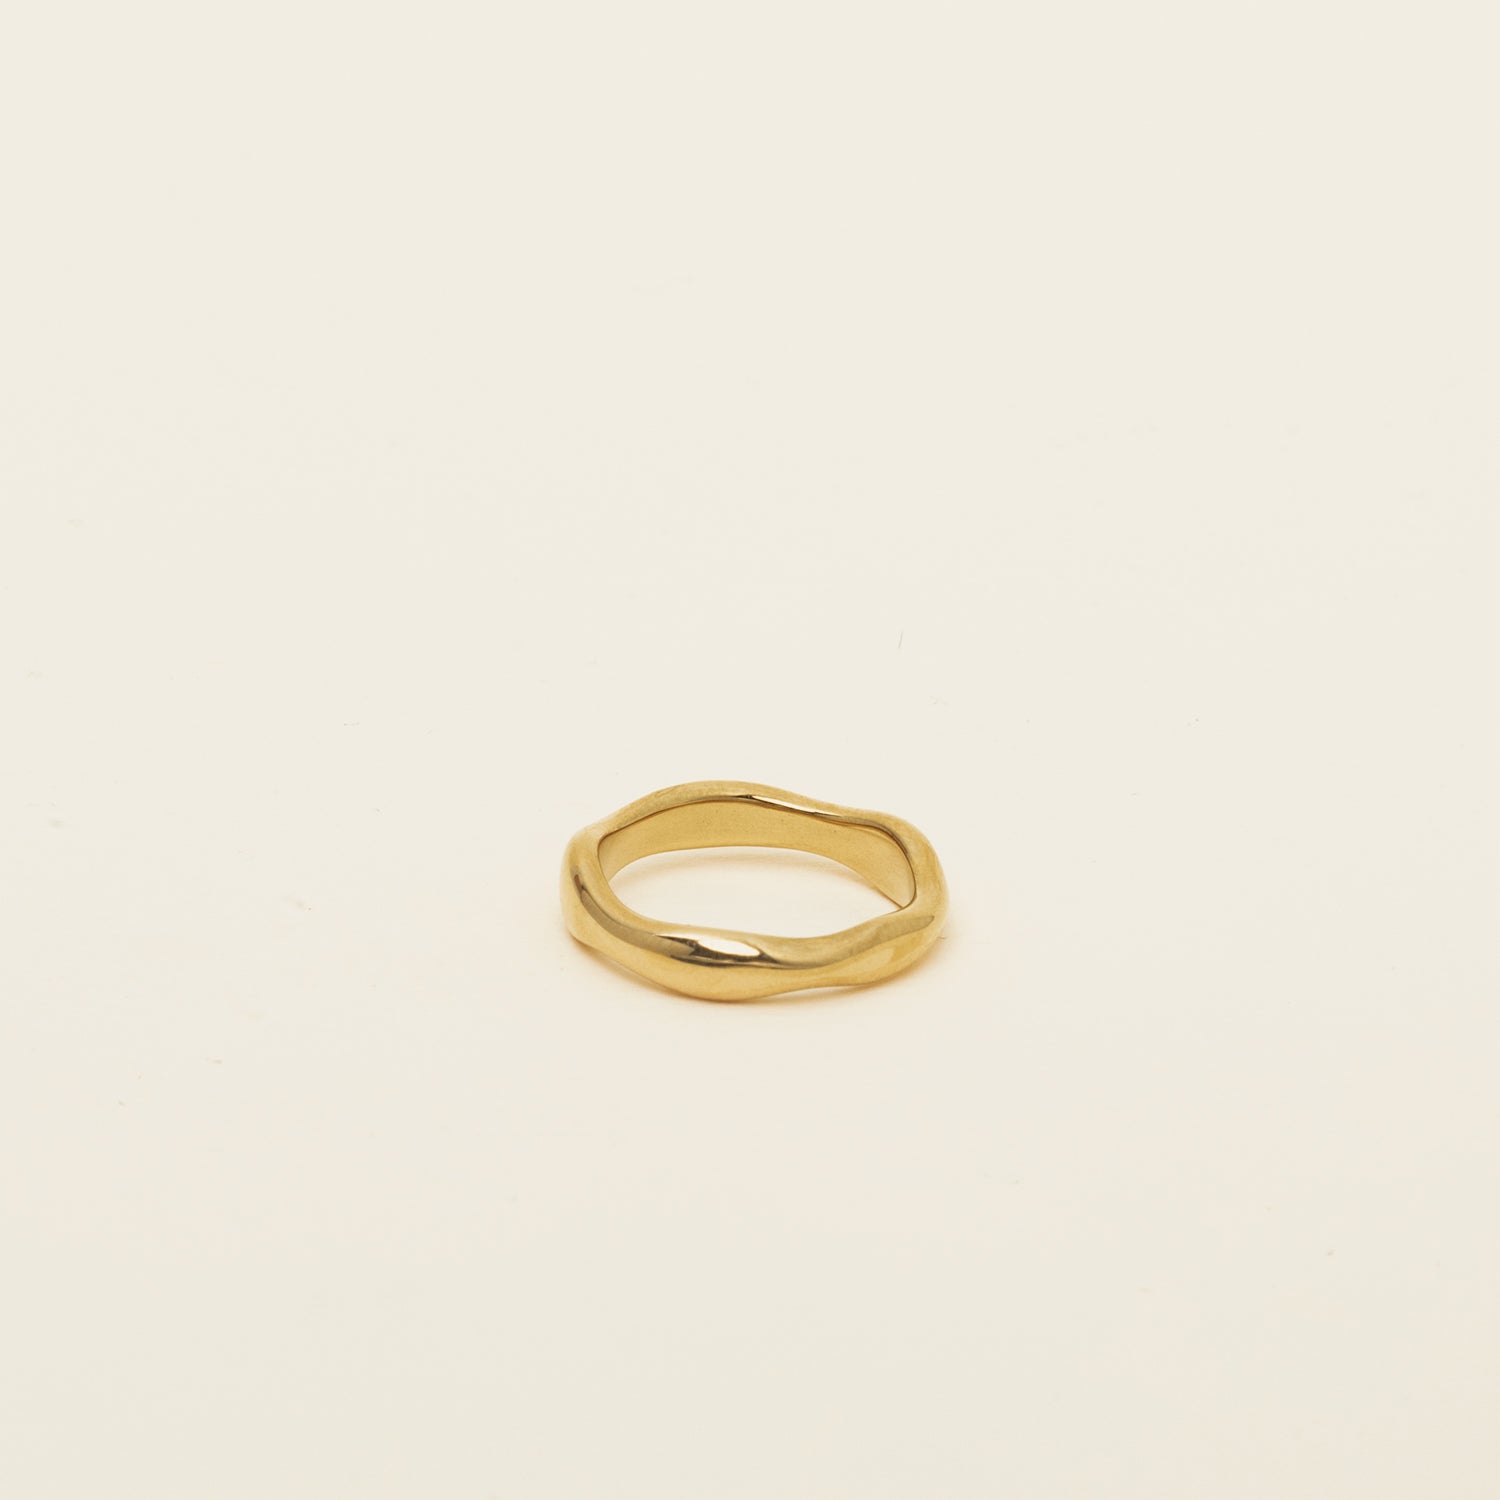 Image of the Organic Wave Ring offers no ability to adjust and is a single item comprised of 18K Gold Plated Stainless Steel, making it non-tarnish and water resistant.